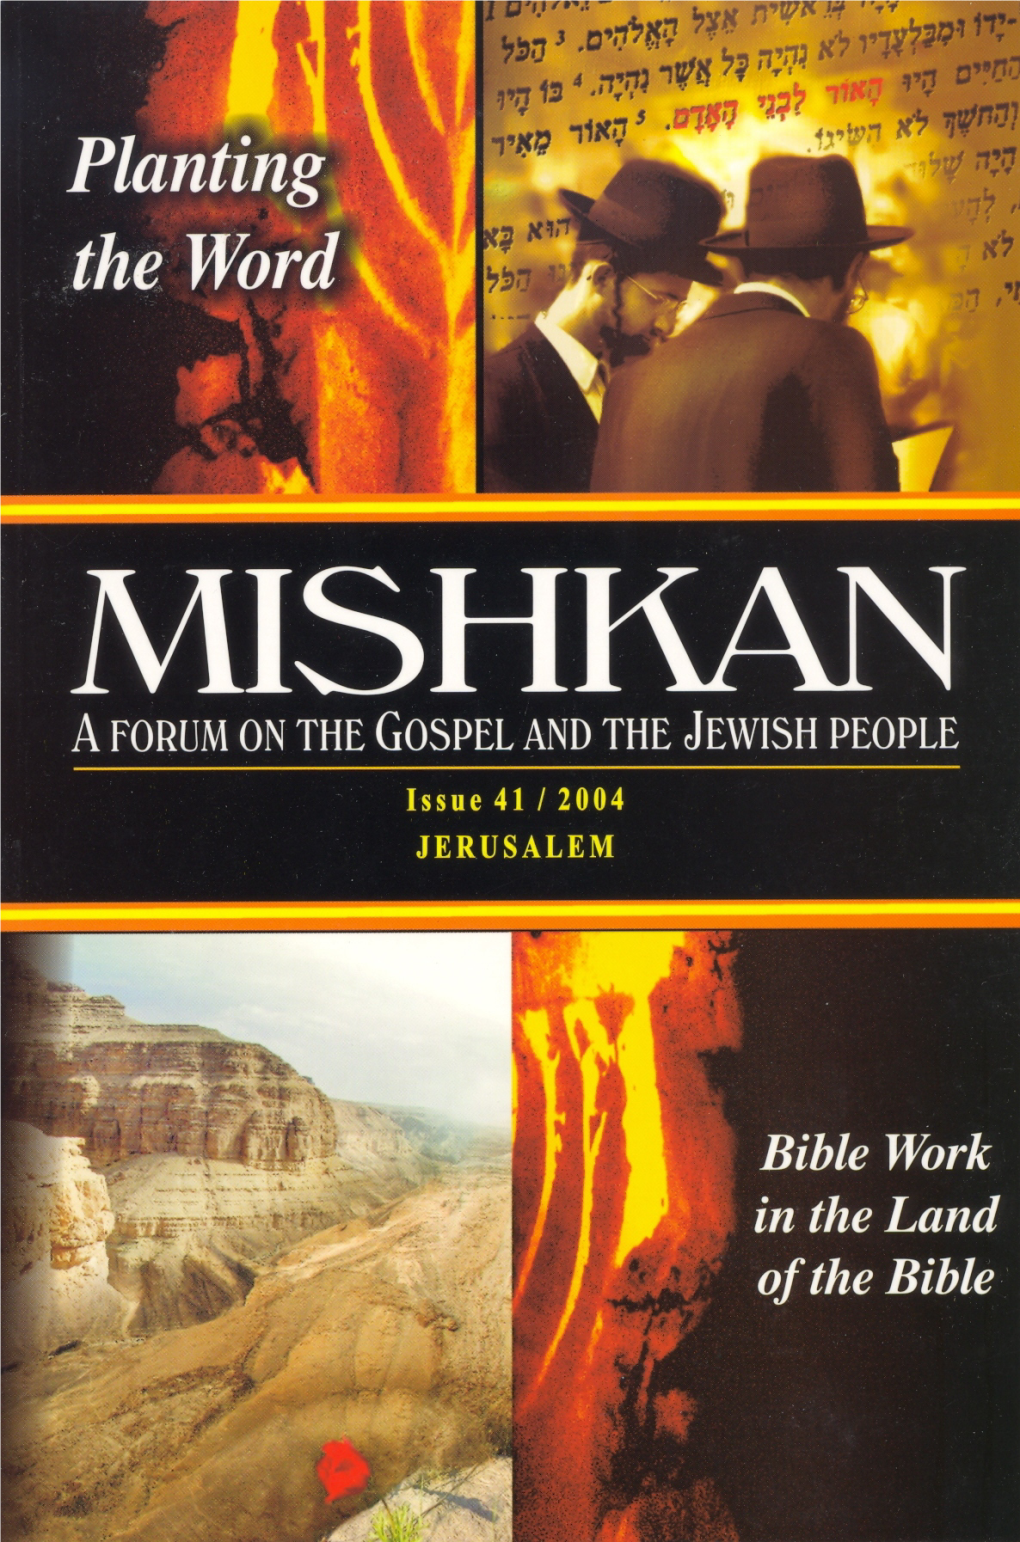 MISHKAN a Forum on the Gospel and the Jewish People